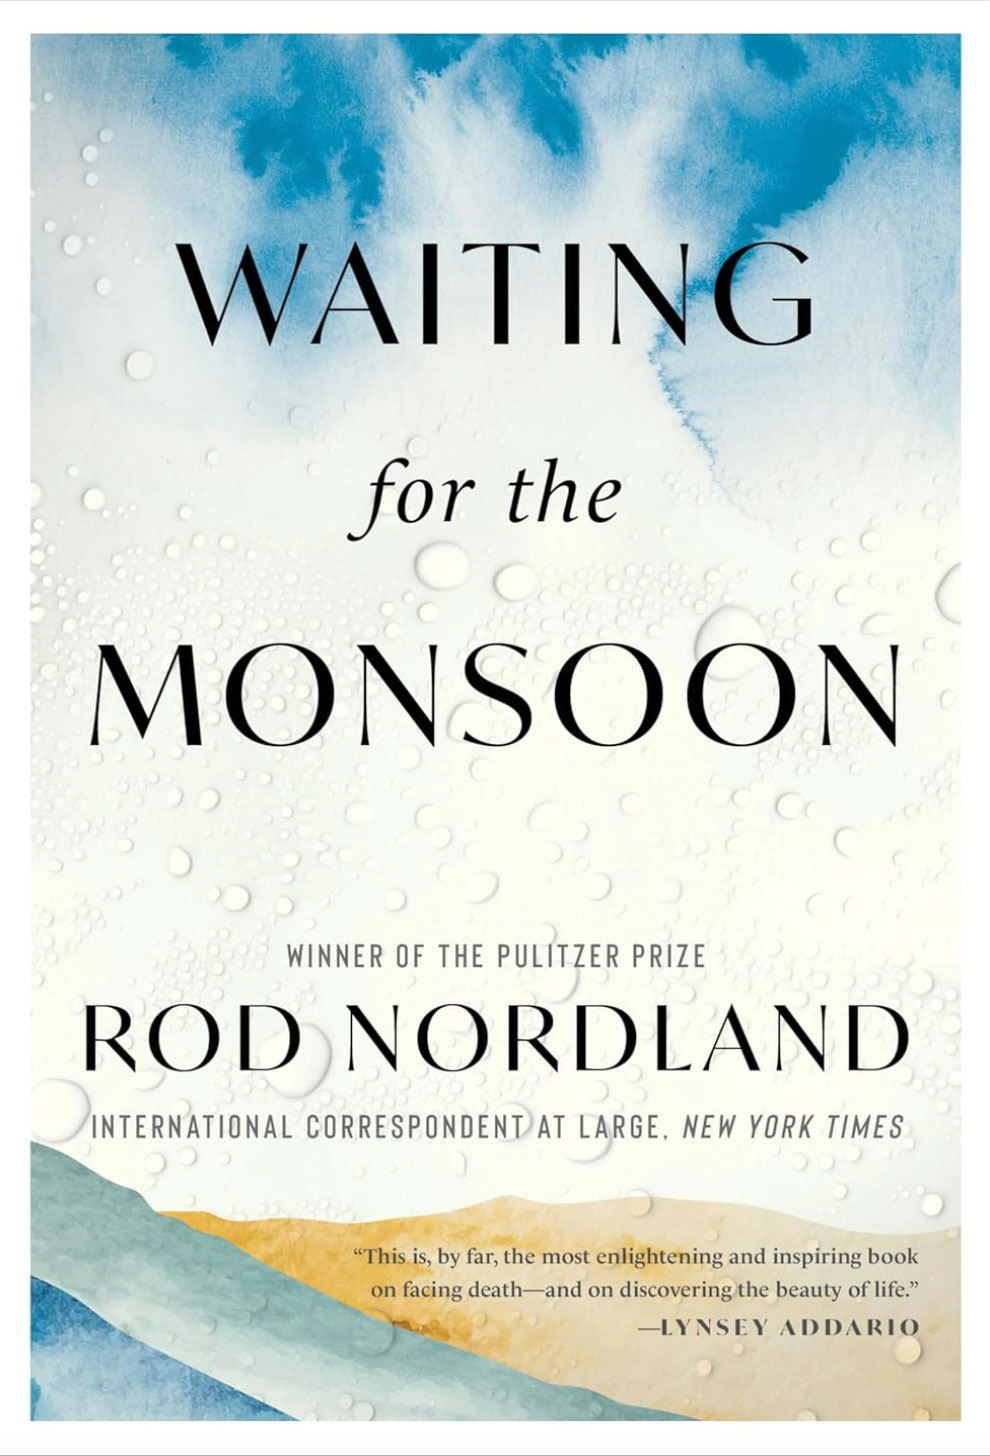 Waiting for the Monsoon book cover, courtesy